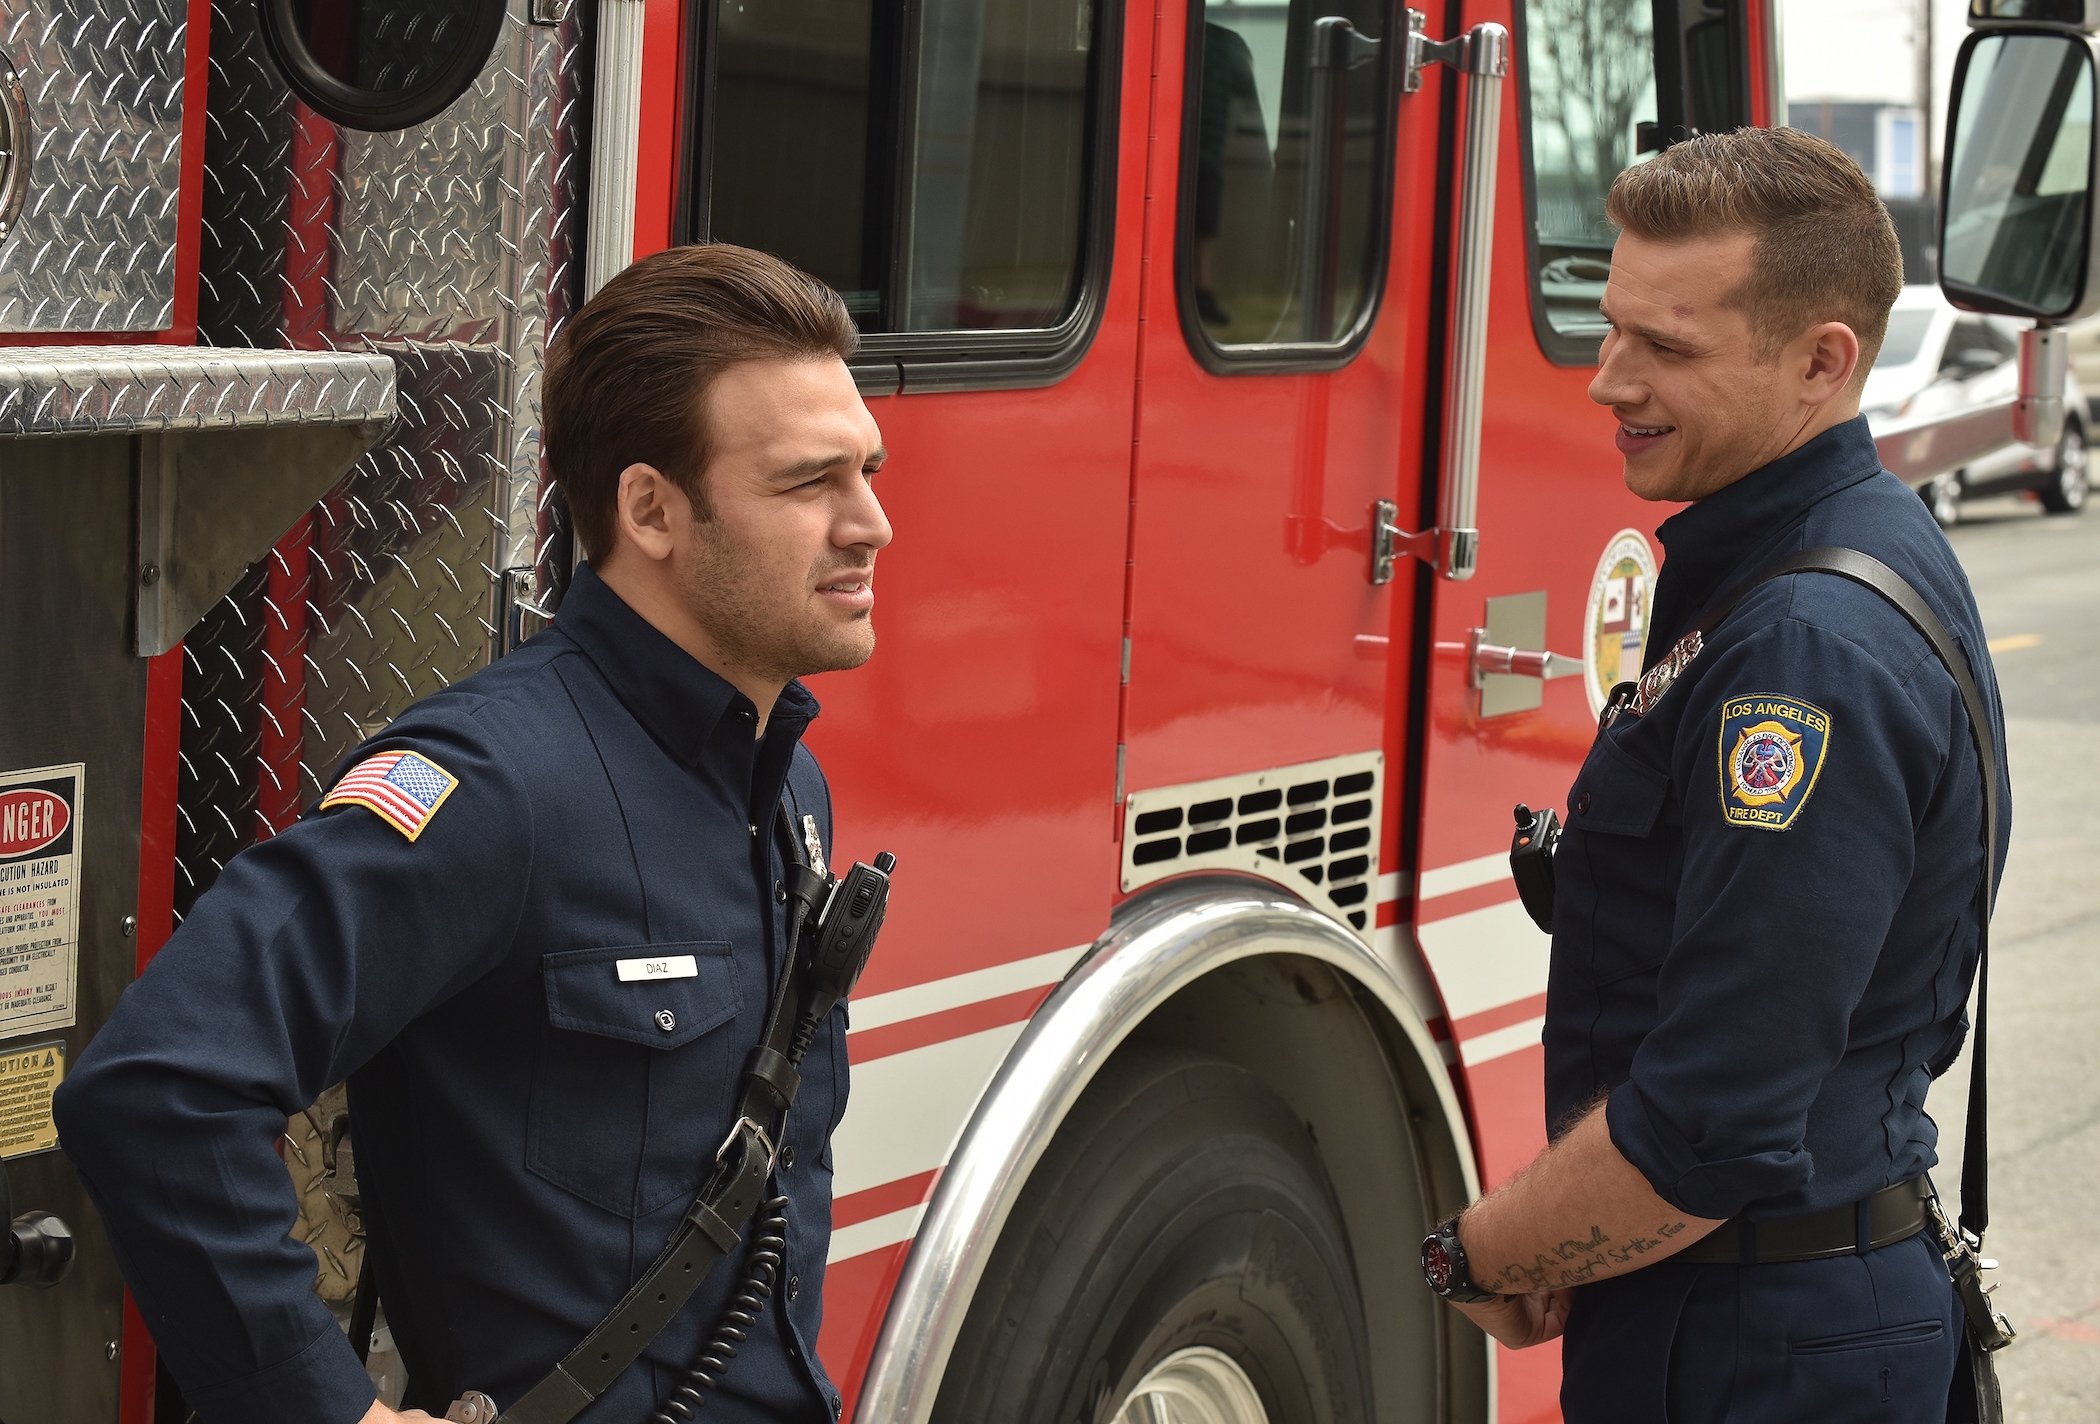 Eddie Diaz and Buck talking and laughing next to a firetruck in '9-1-1'